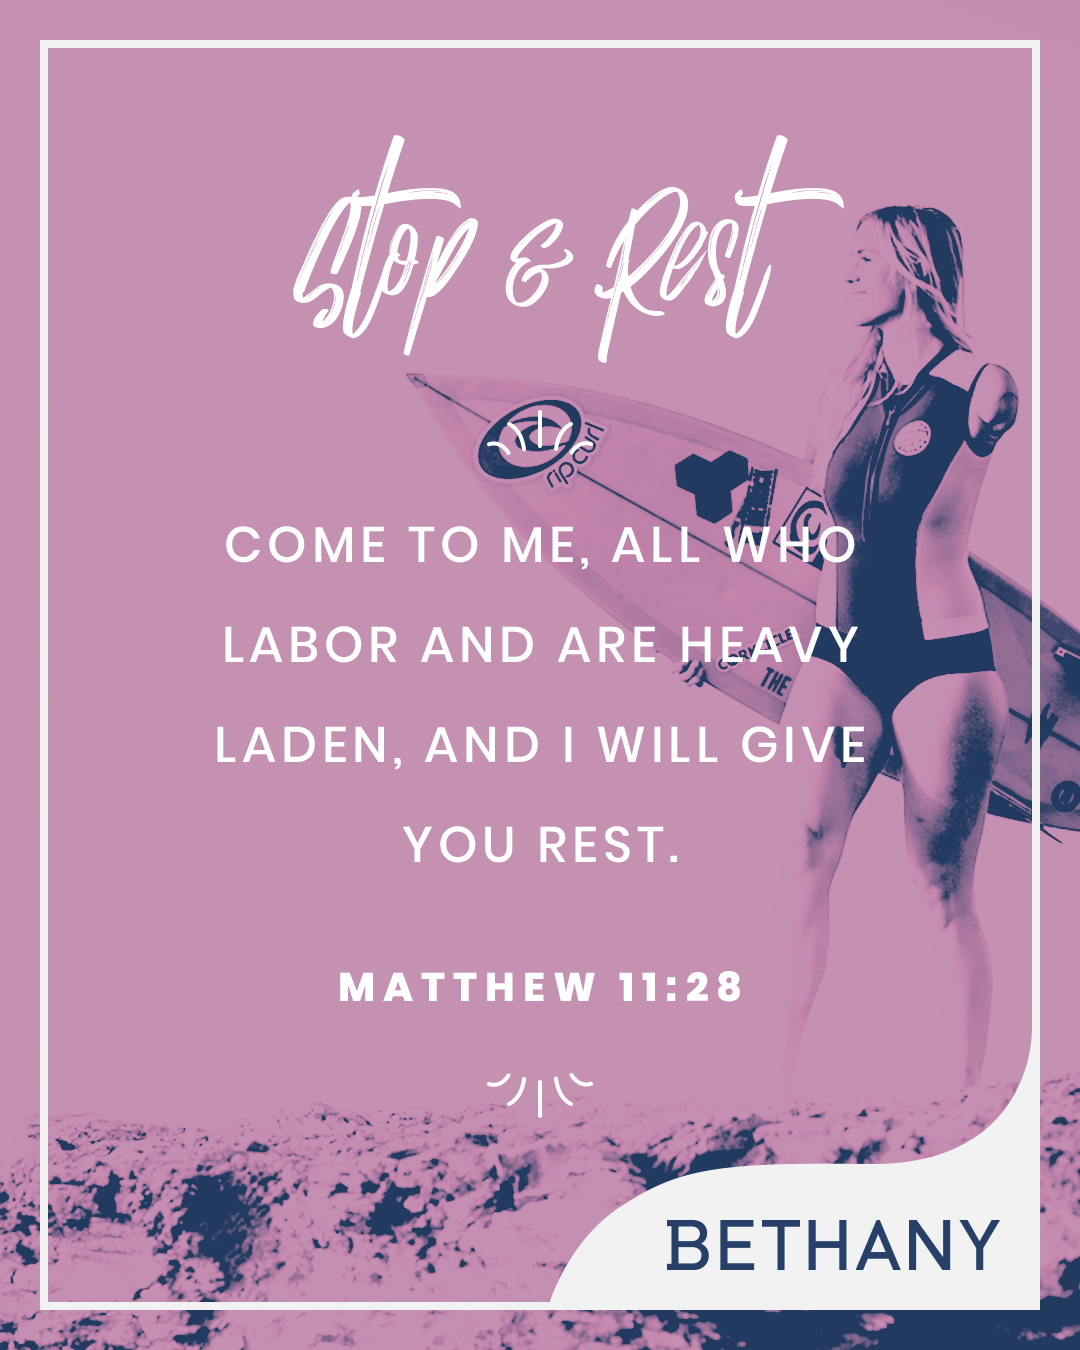 Bethany shares verses to help us stop and rest